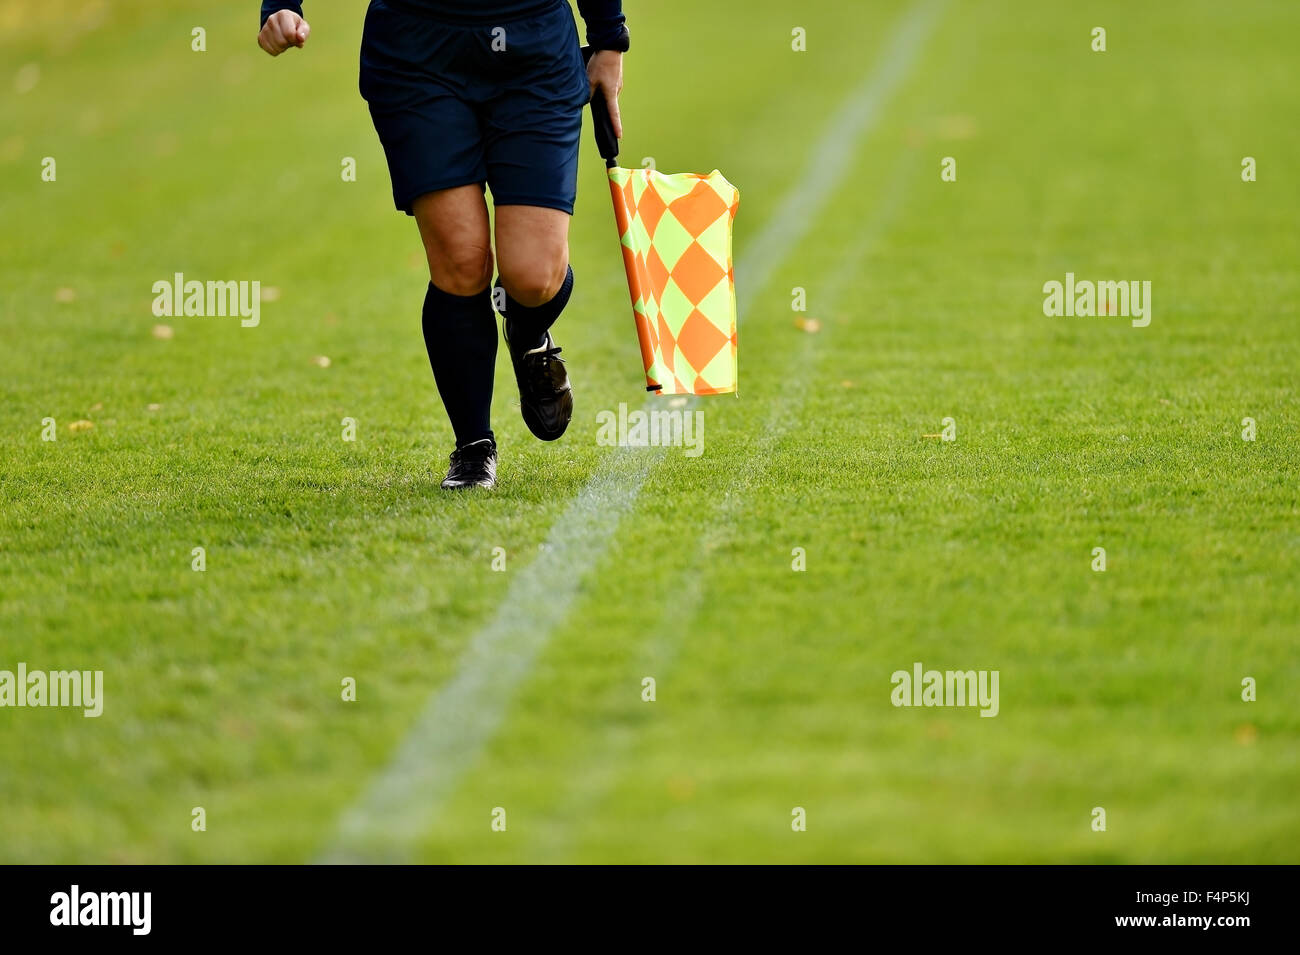 Assistant referee running along the sideline during a soccer match Stock Photo